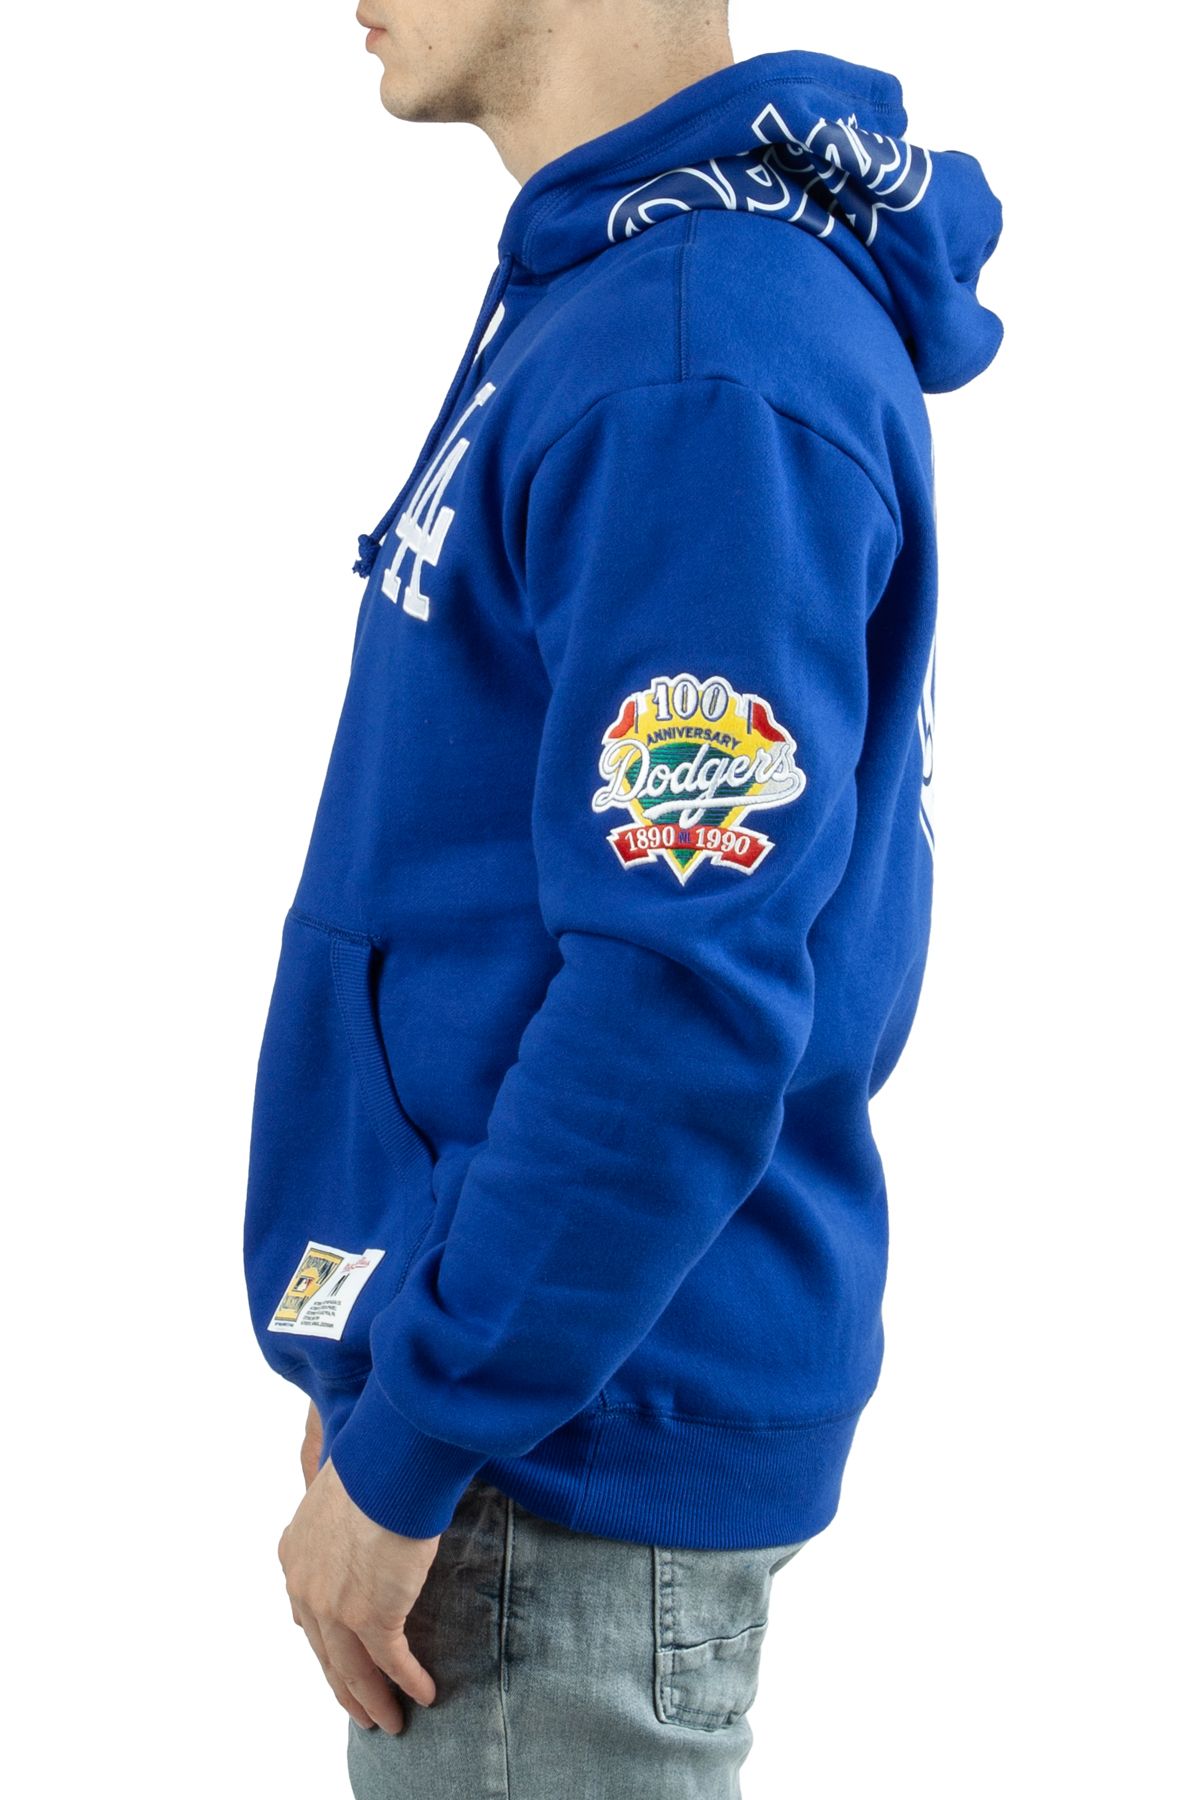 MITCHELL AND NESS LOS ANGELES DODGERS HOODIE FPHD4987-LADYYPPPROYA